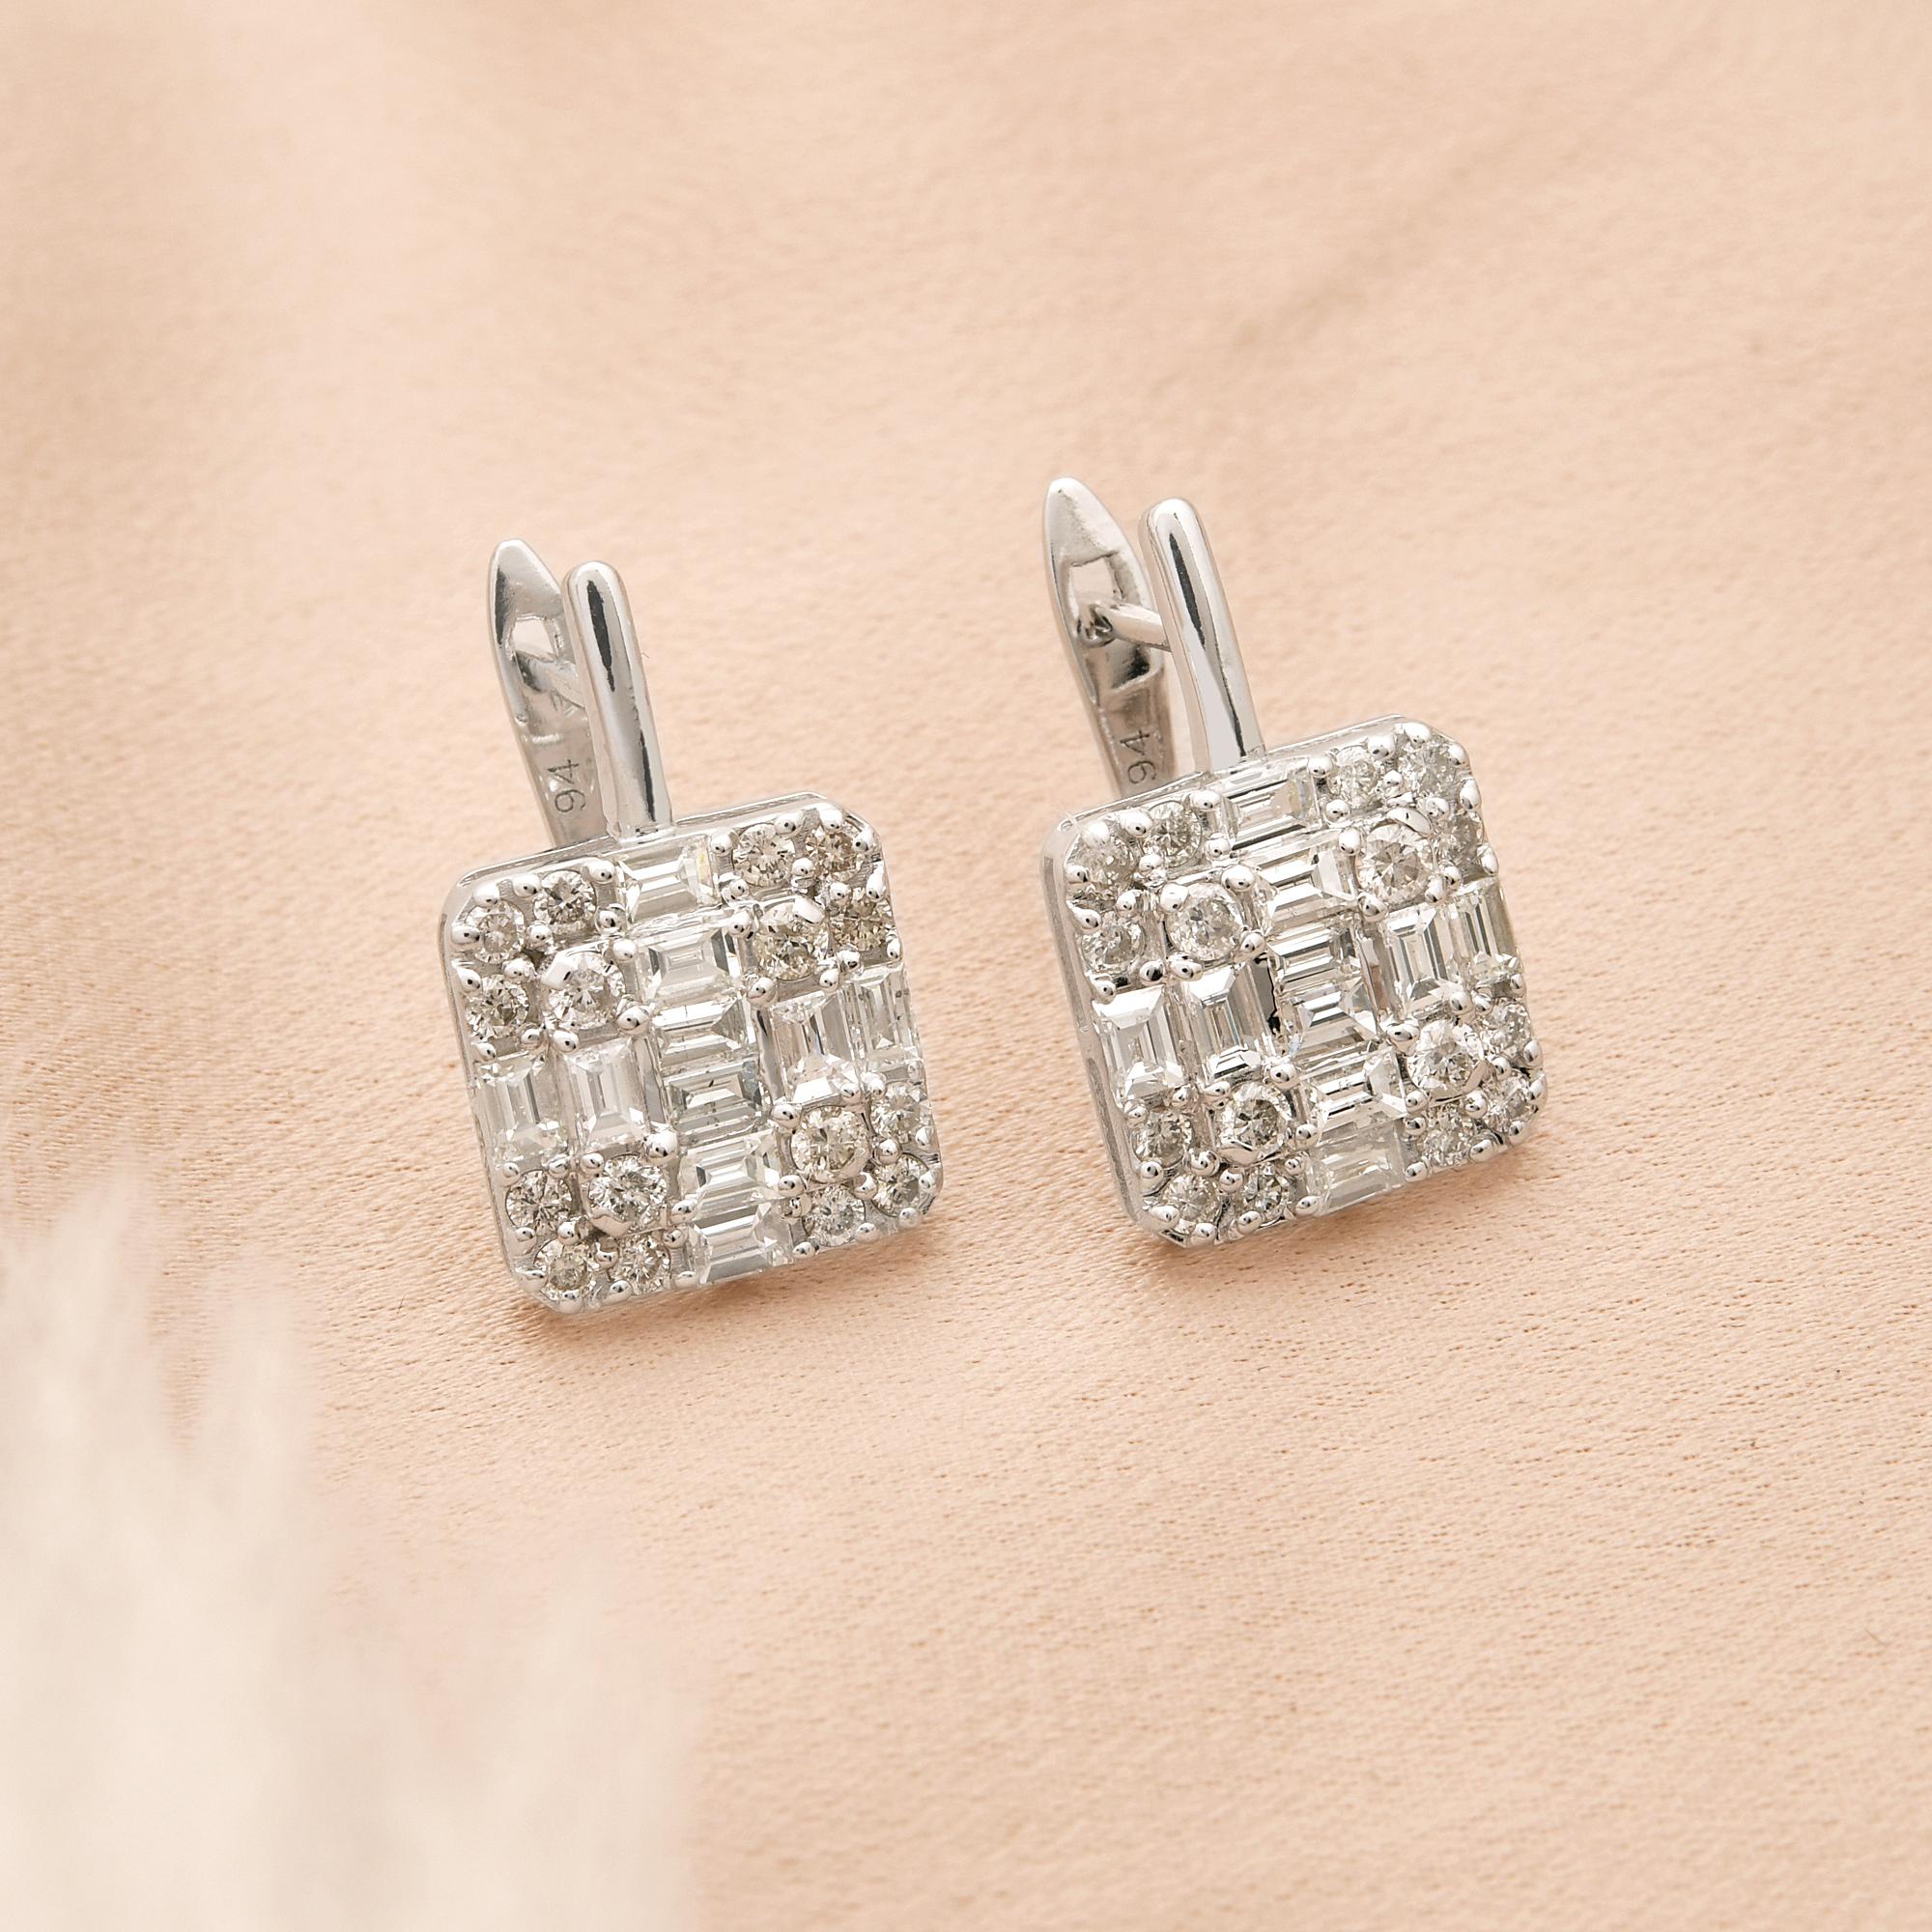 Modern 2.20 Carat SI Clarity HI Color Baguette Diamond Earrings 10k White Gold Jewelry For Sale